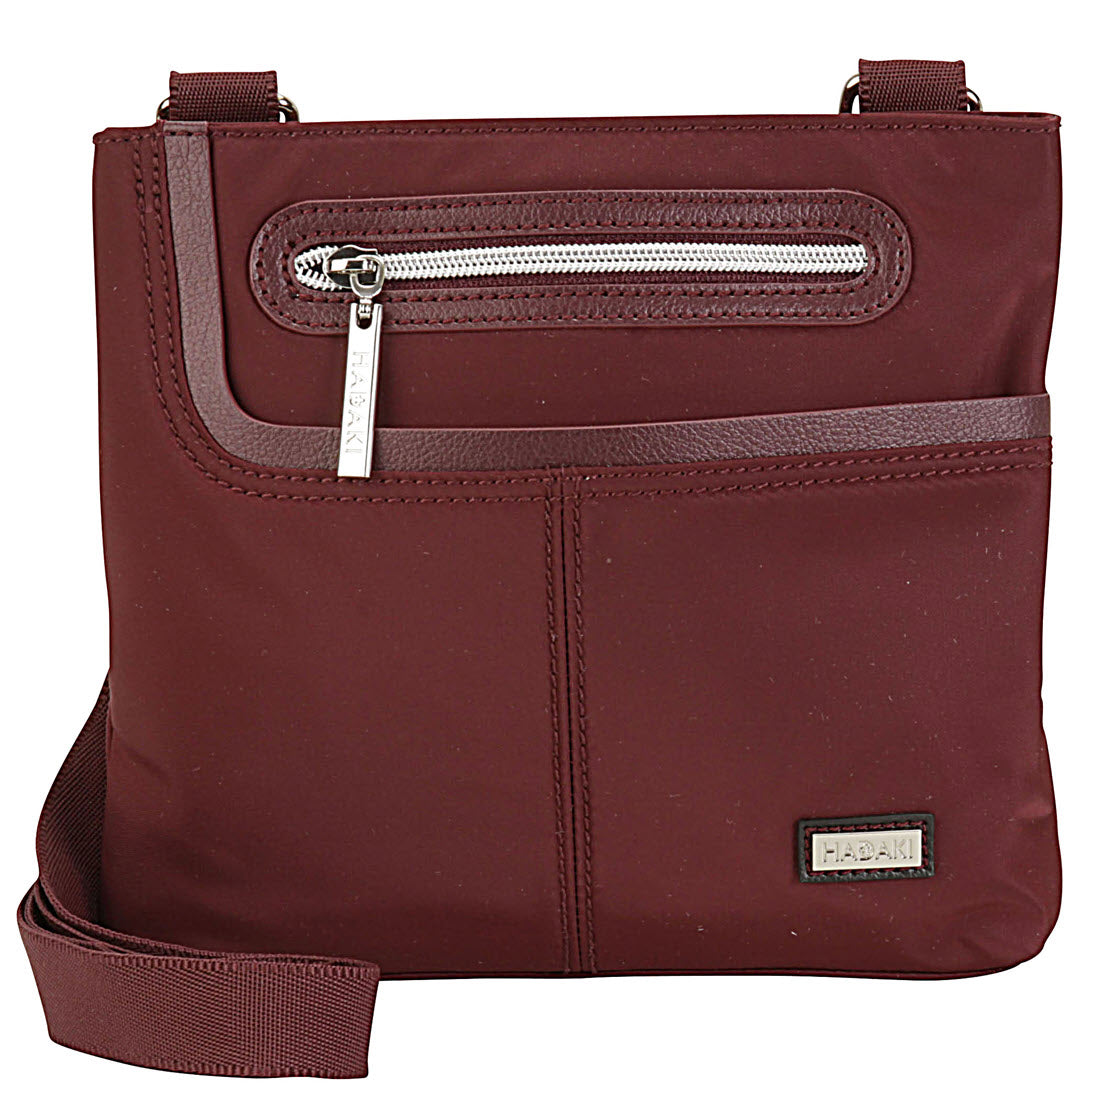 Burgundy Hadaki Mini Me Crossbody bag with front zipper pocket. 
should be substituted with 
MINI ME CROSSBODY WINE by Hadaki